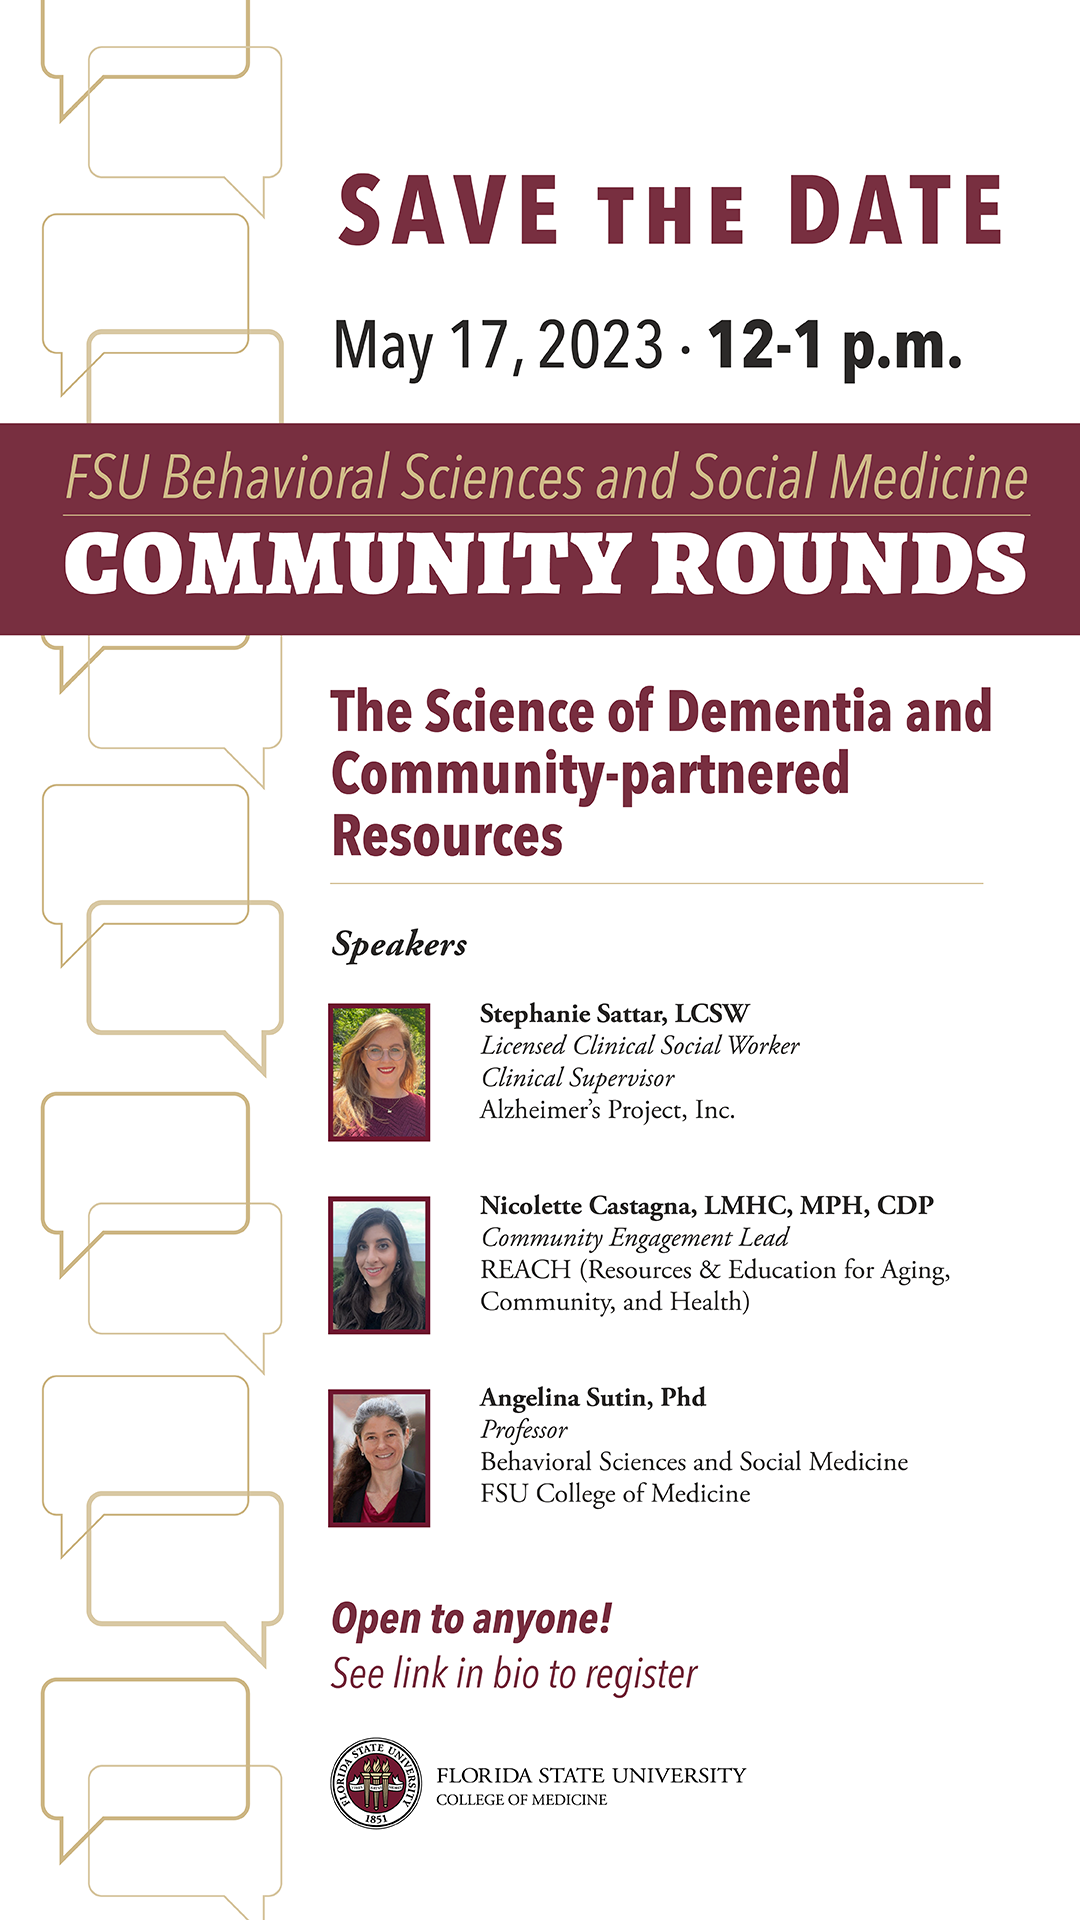 Community Rounds: The Science of Dementia and Community-Partnered Resources